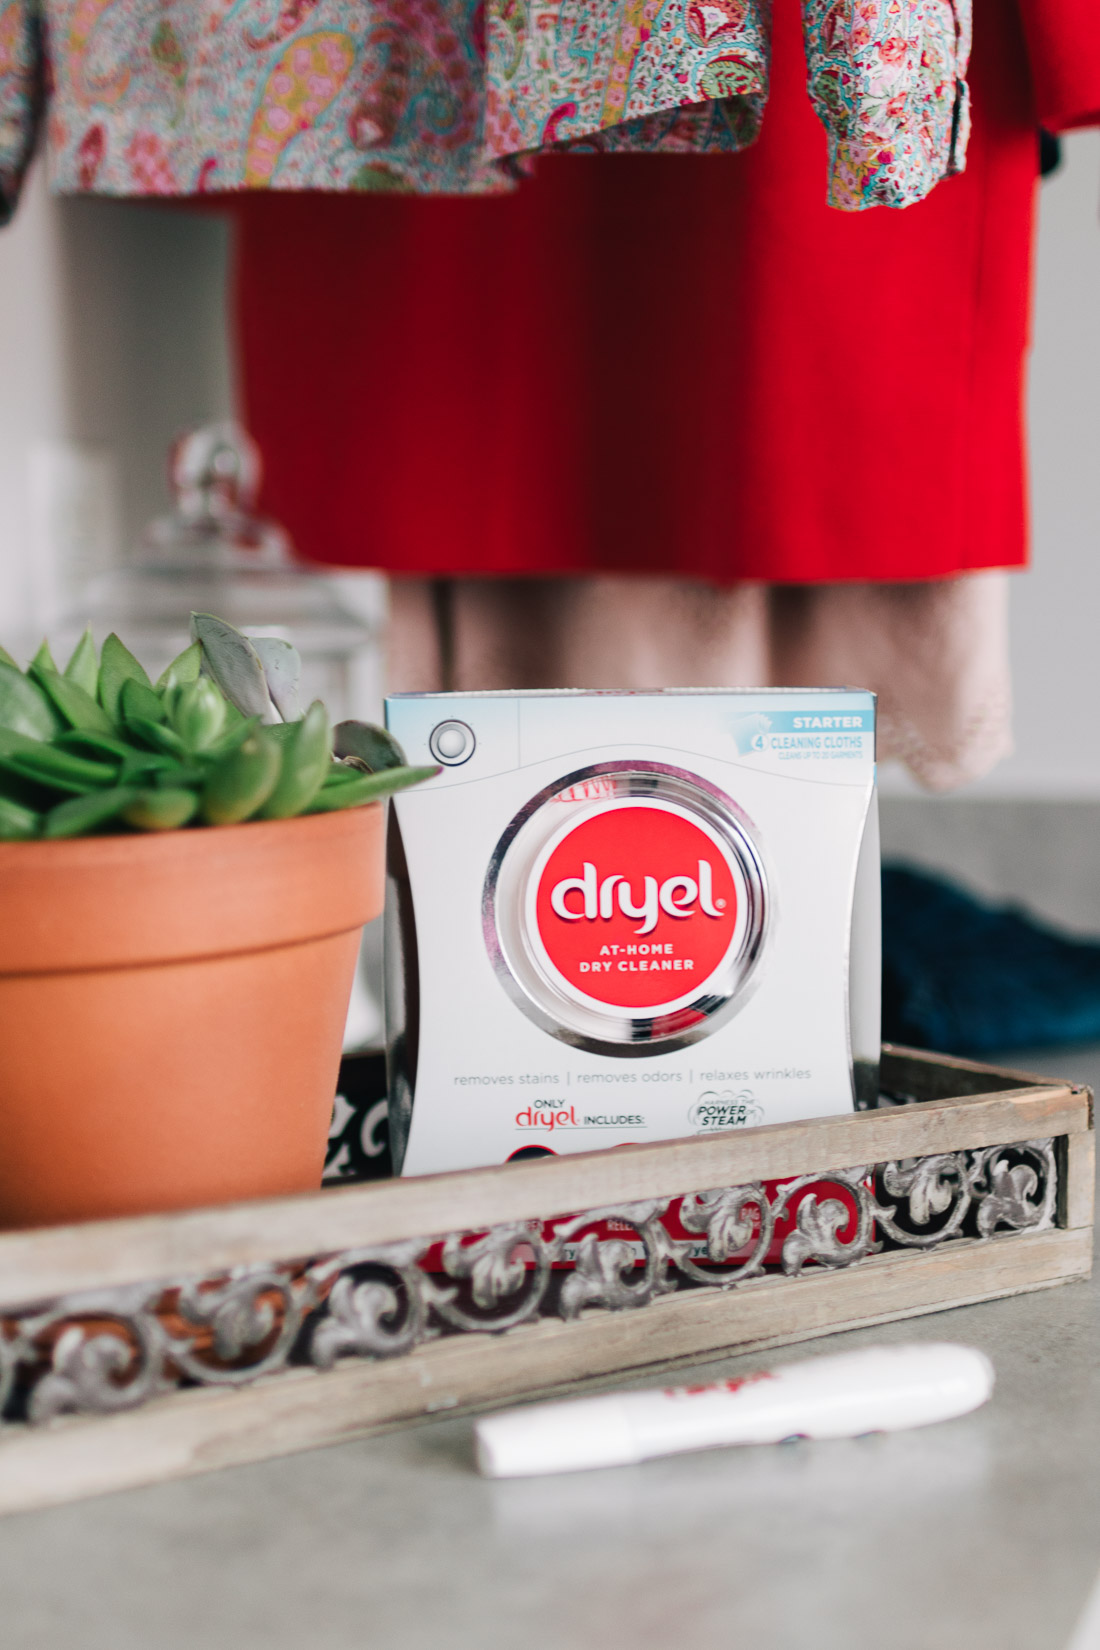 Five Ways I Use Dryel to Clean My Clothes - Pumps & Push Ups